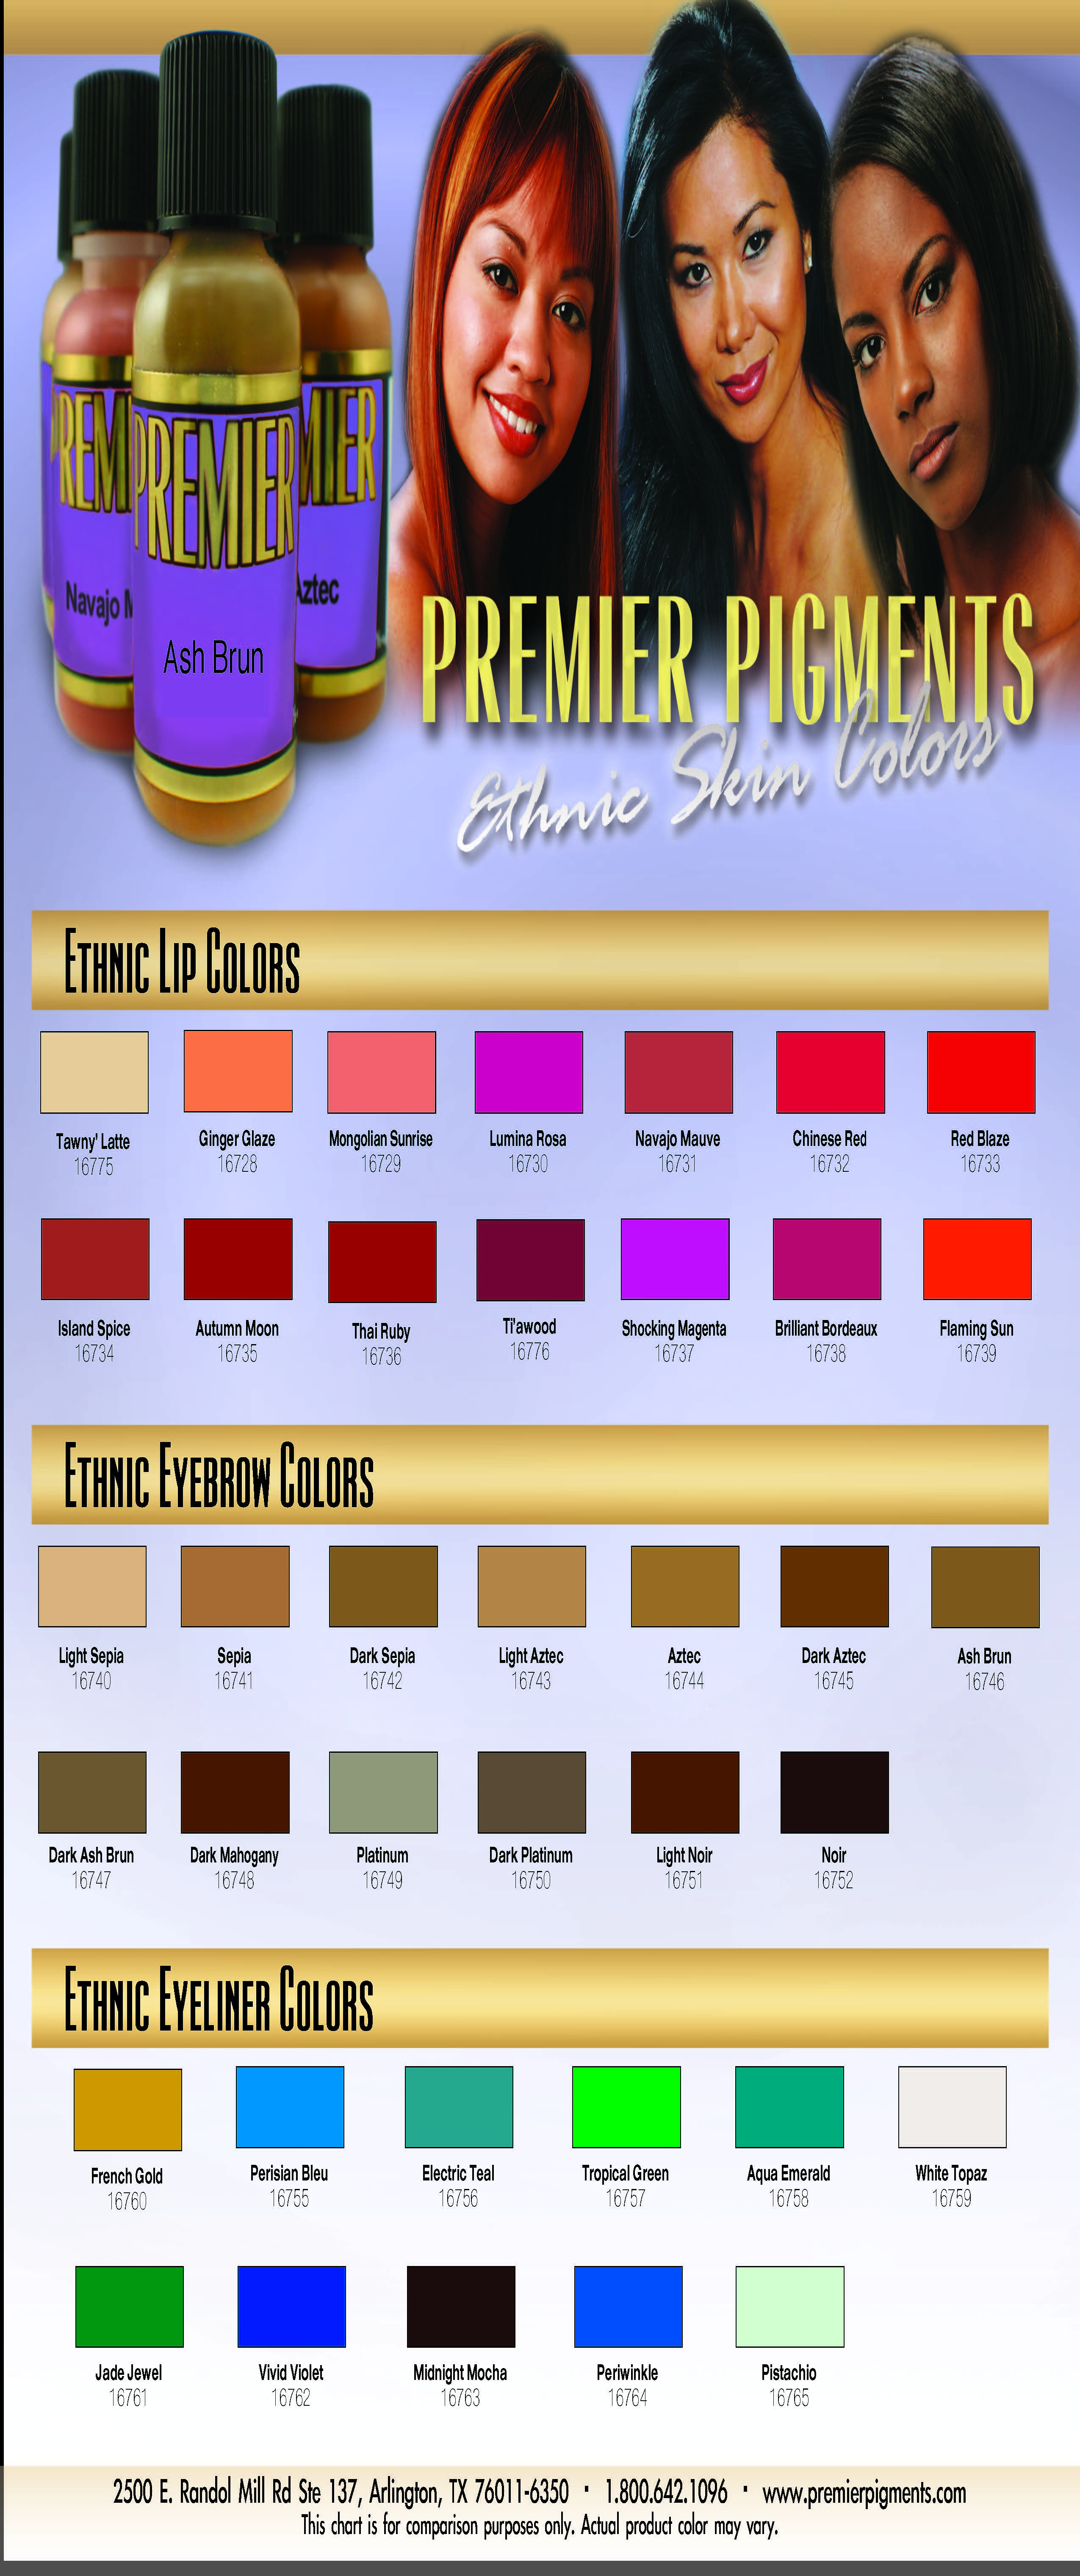 ethnic-color-chart-page-1.jpg